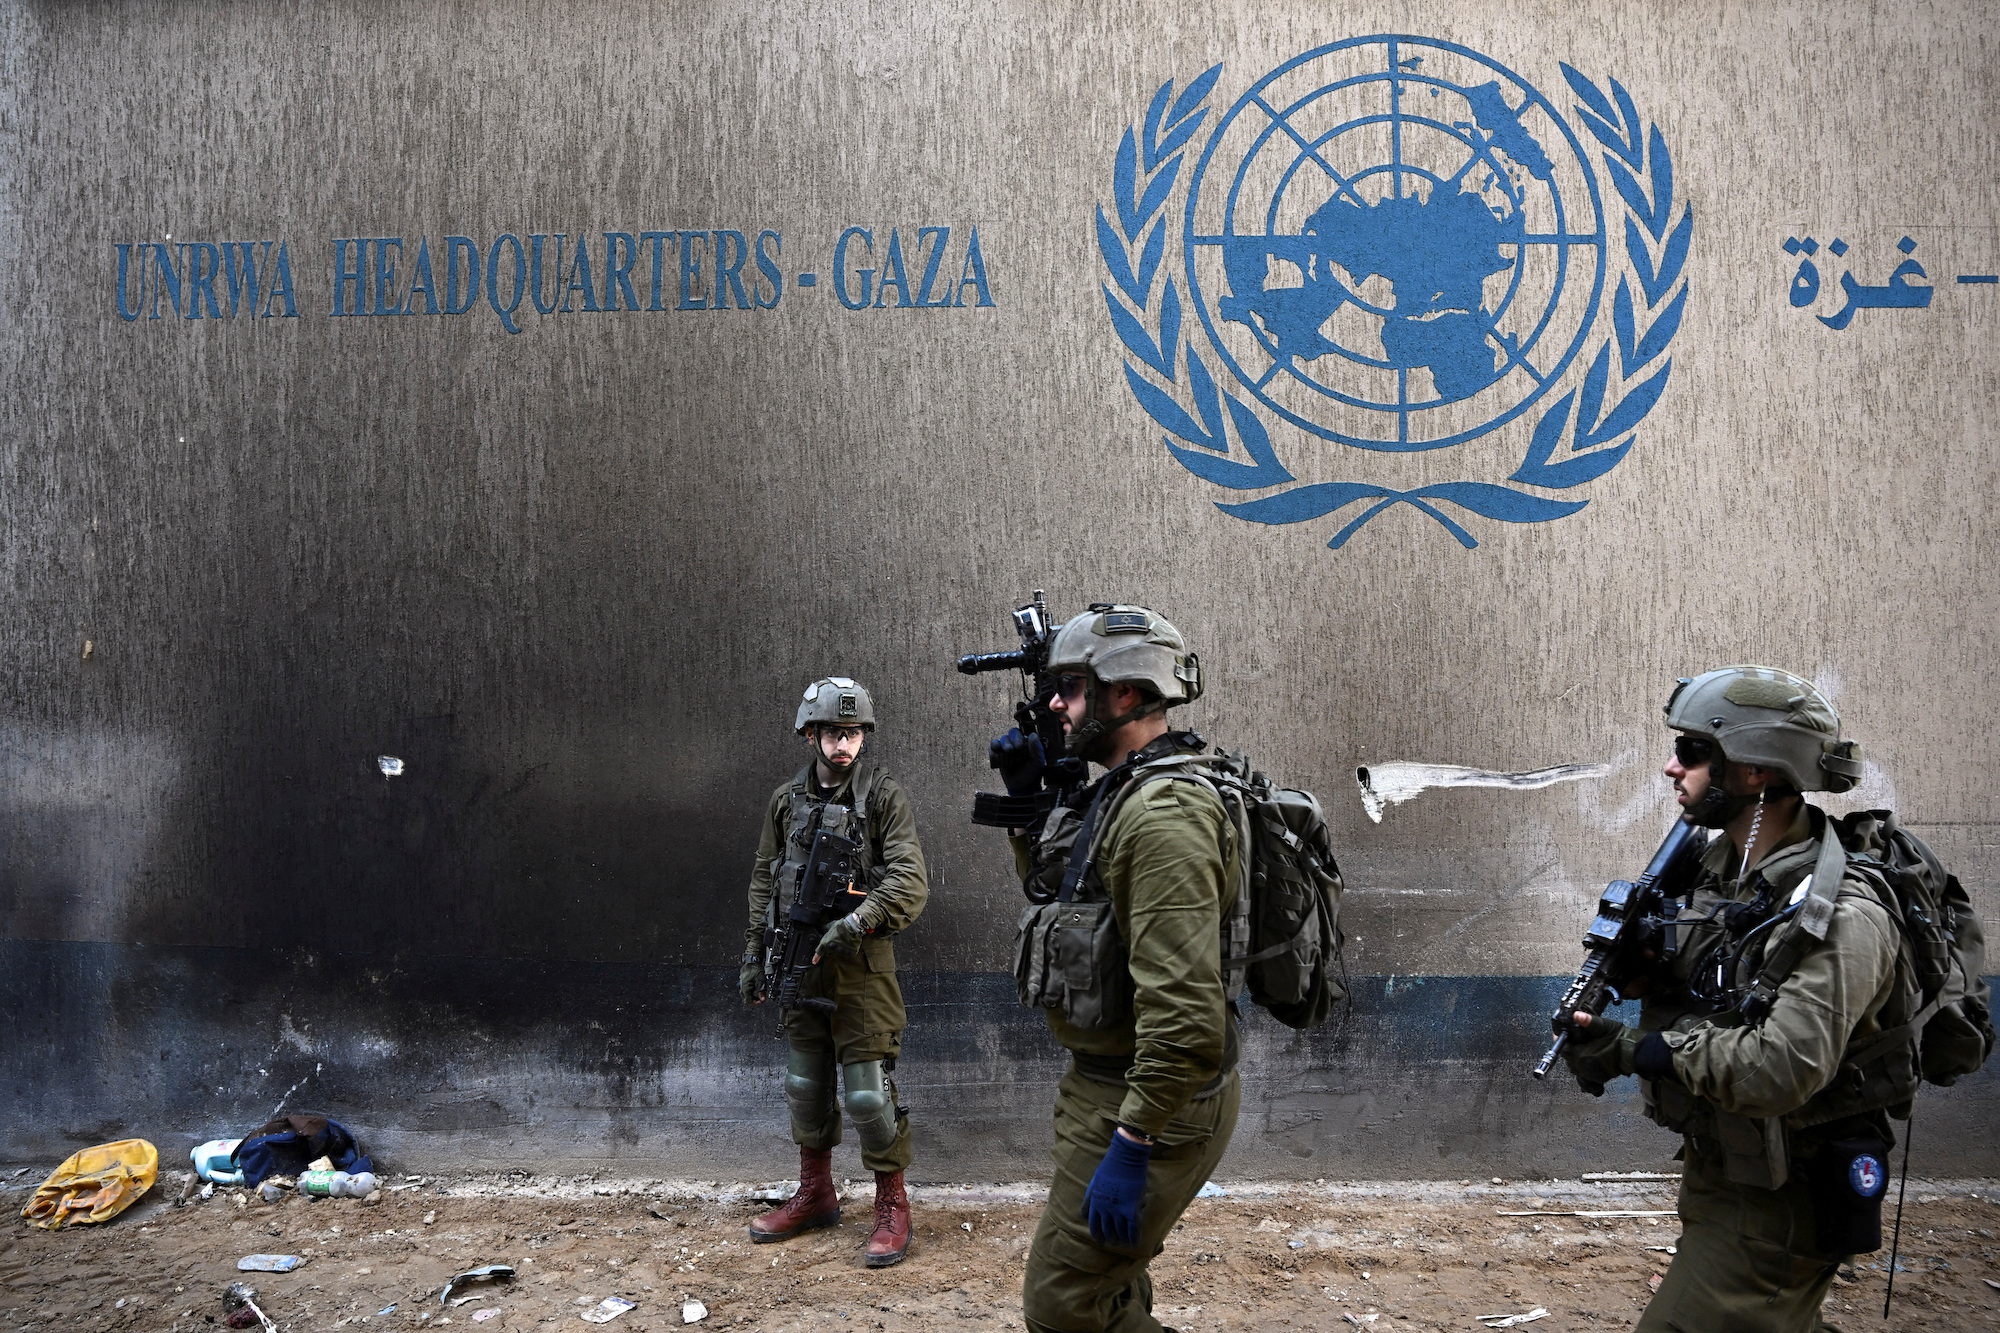 IDF soldiers operate next to the UNRWA headquarters in Gaza on February 8.